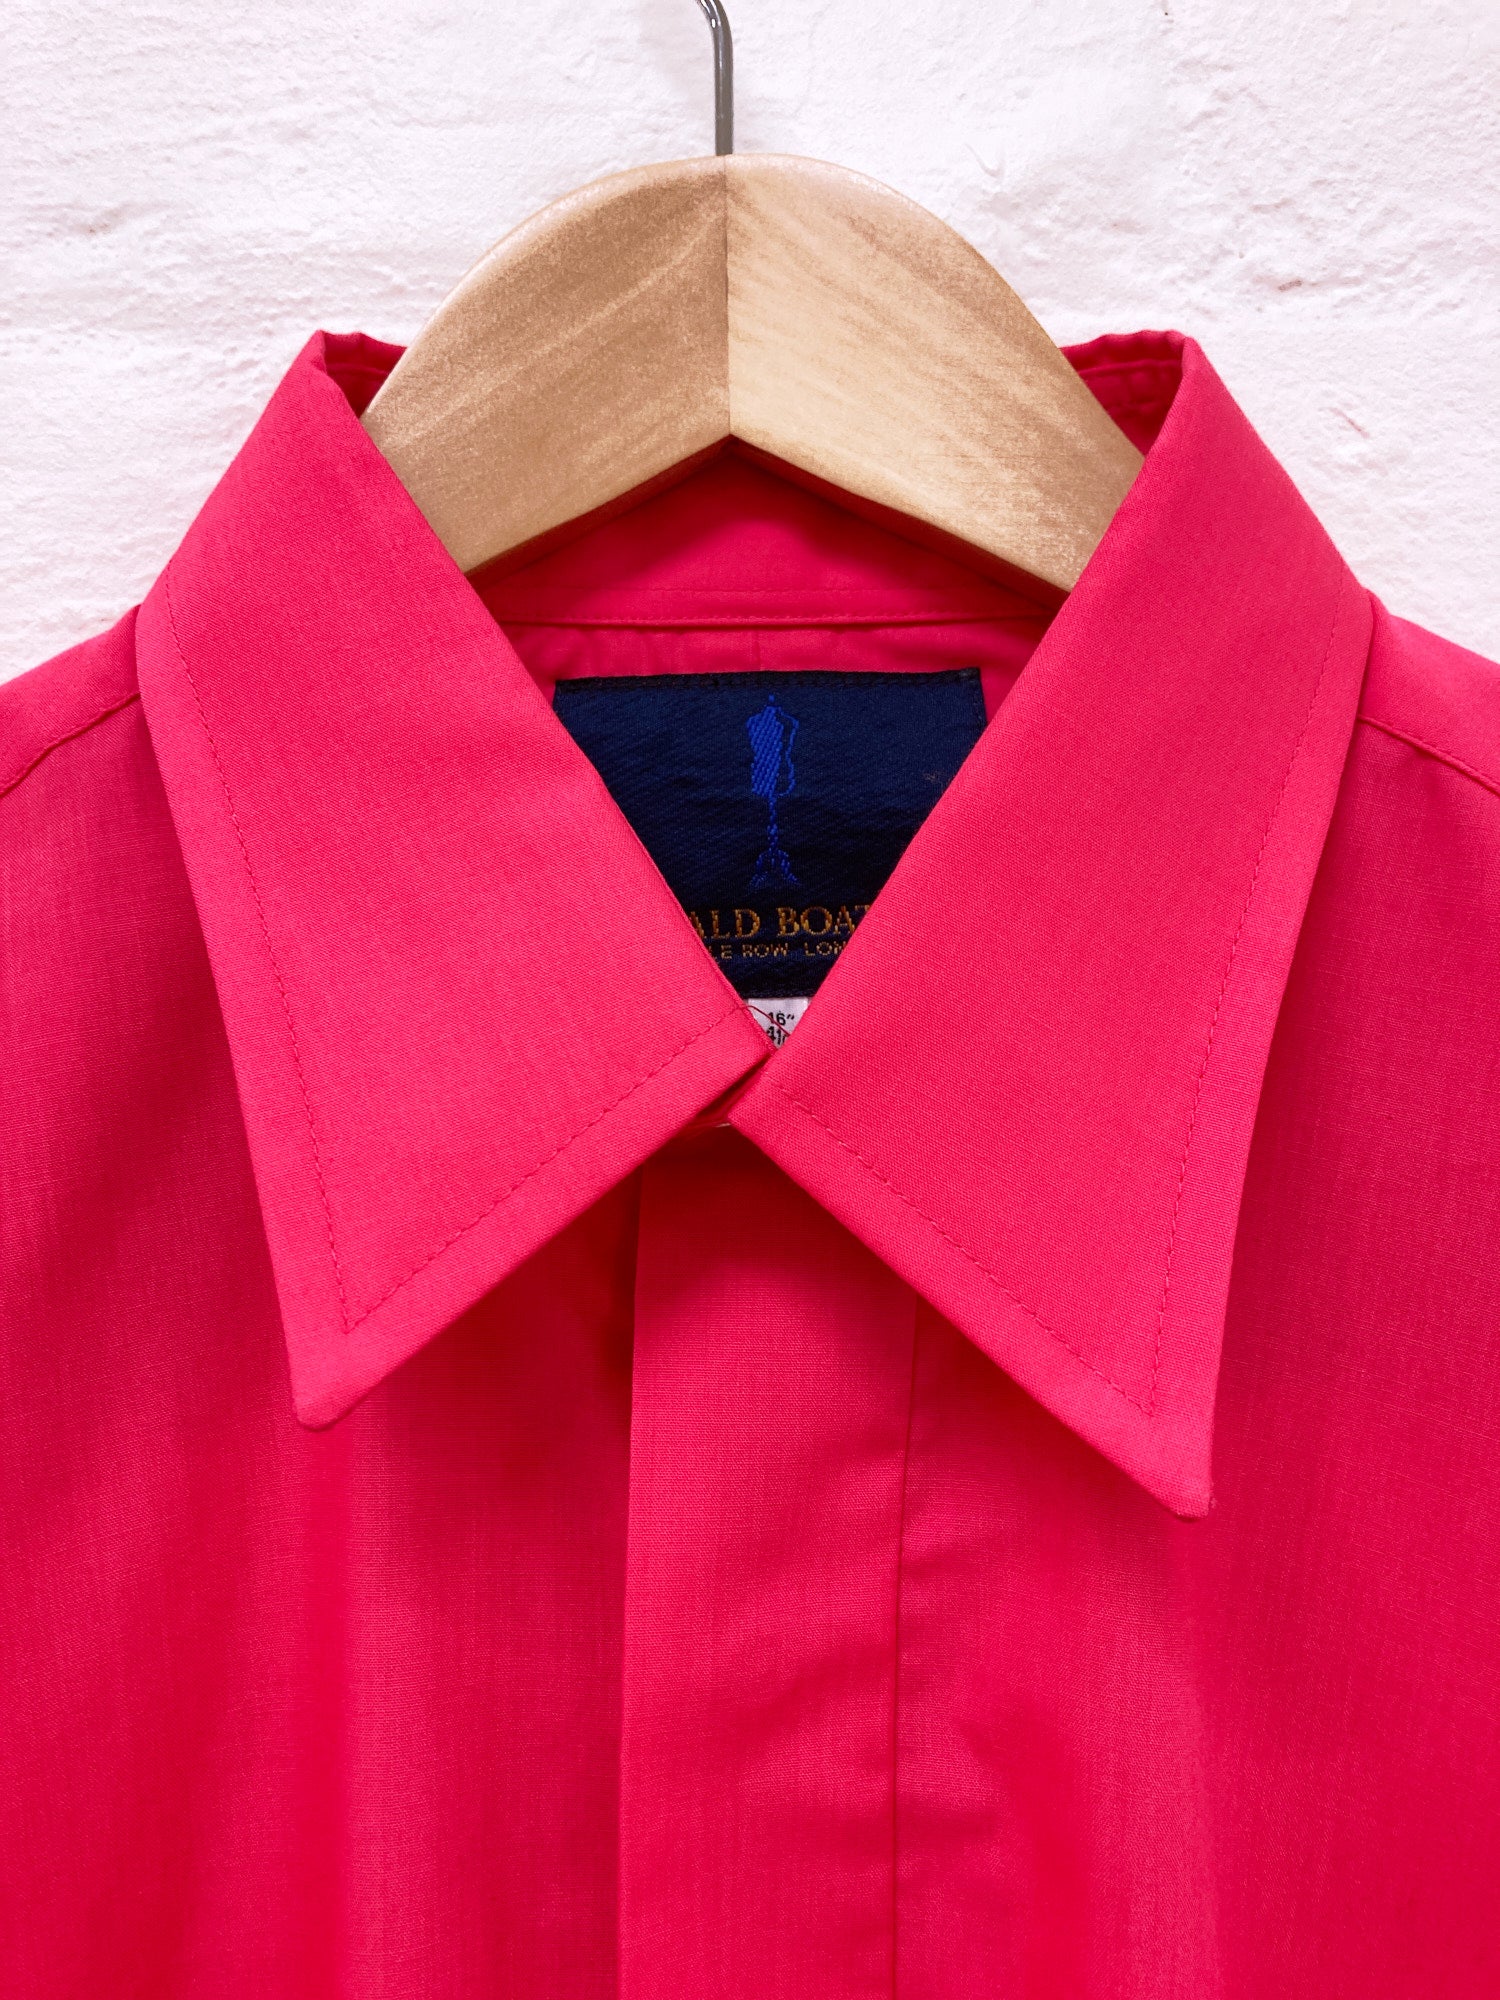 Ozwald Boateng Savile Row fluorescent pink shirt with pocket square